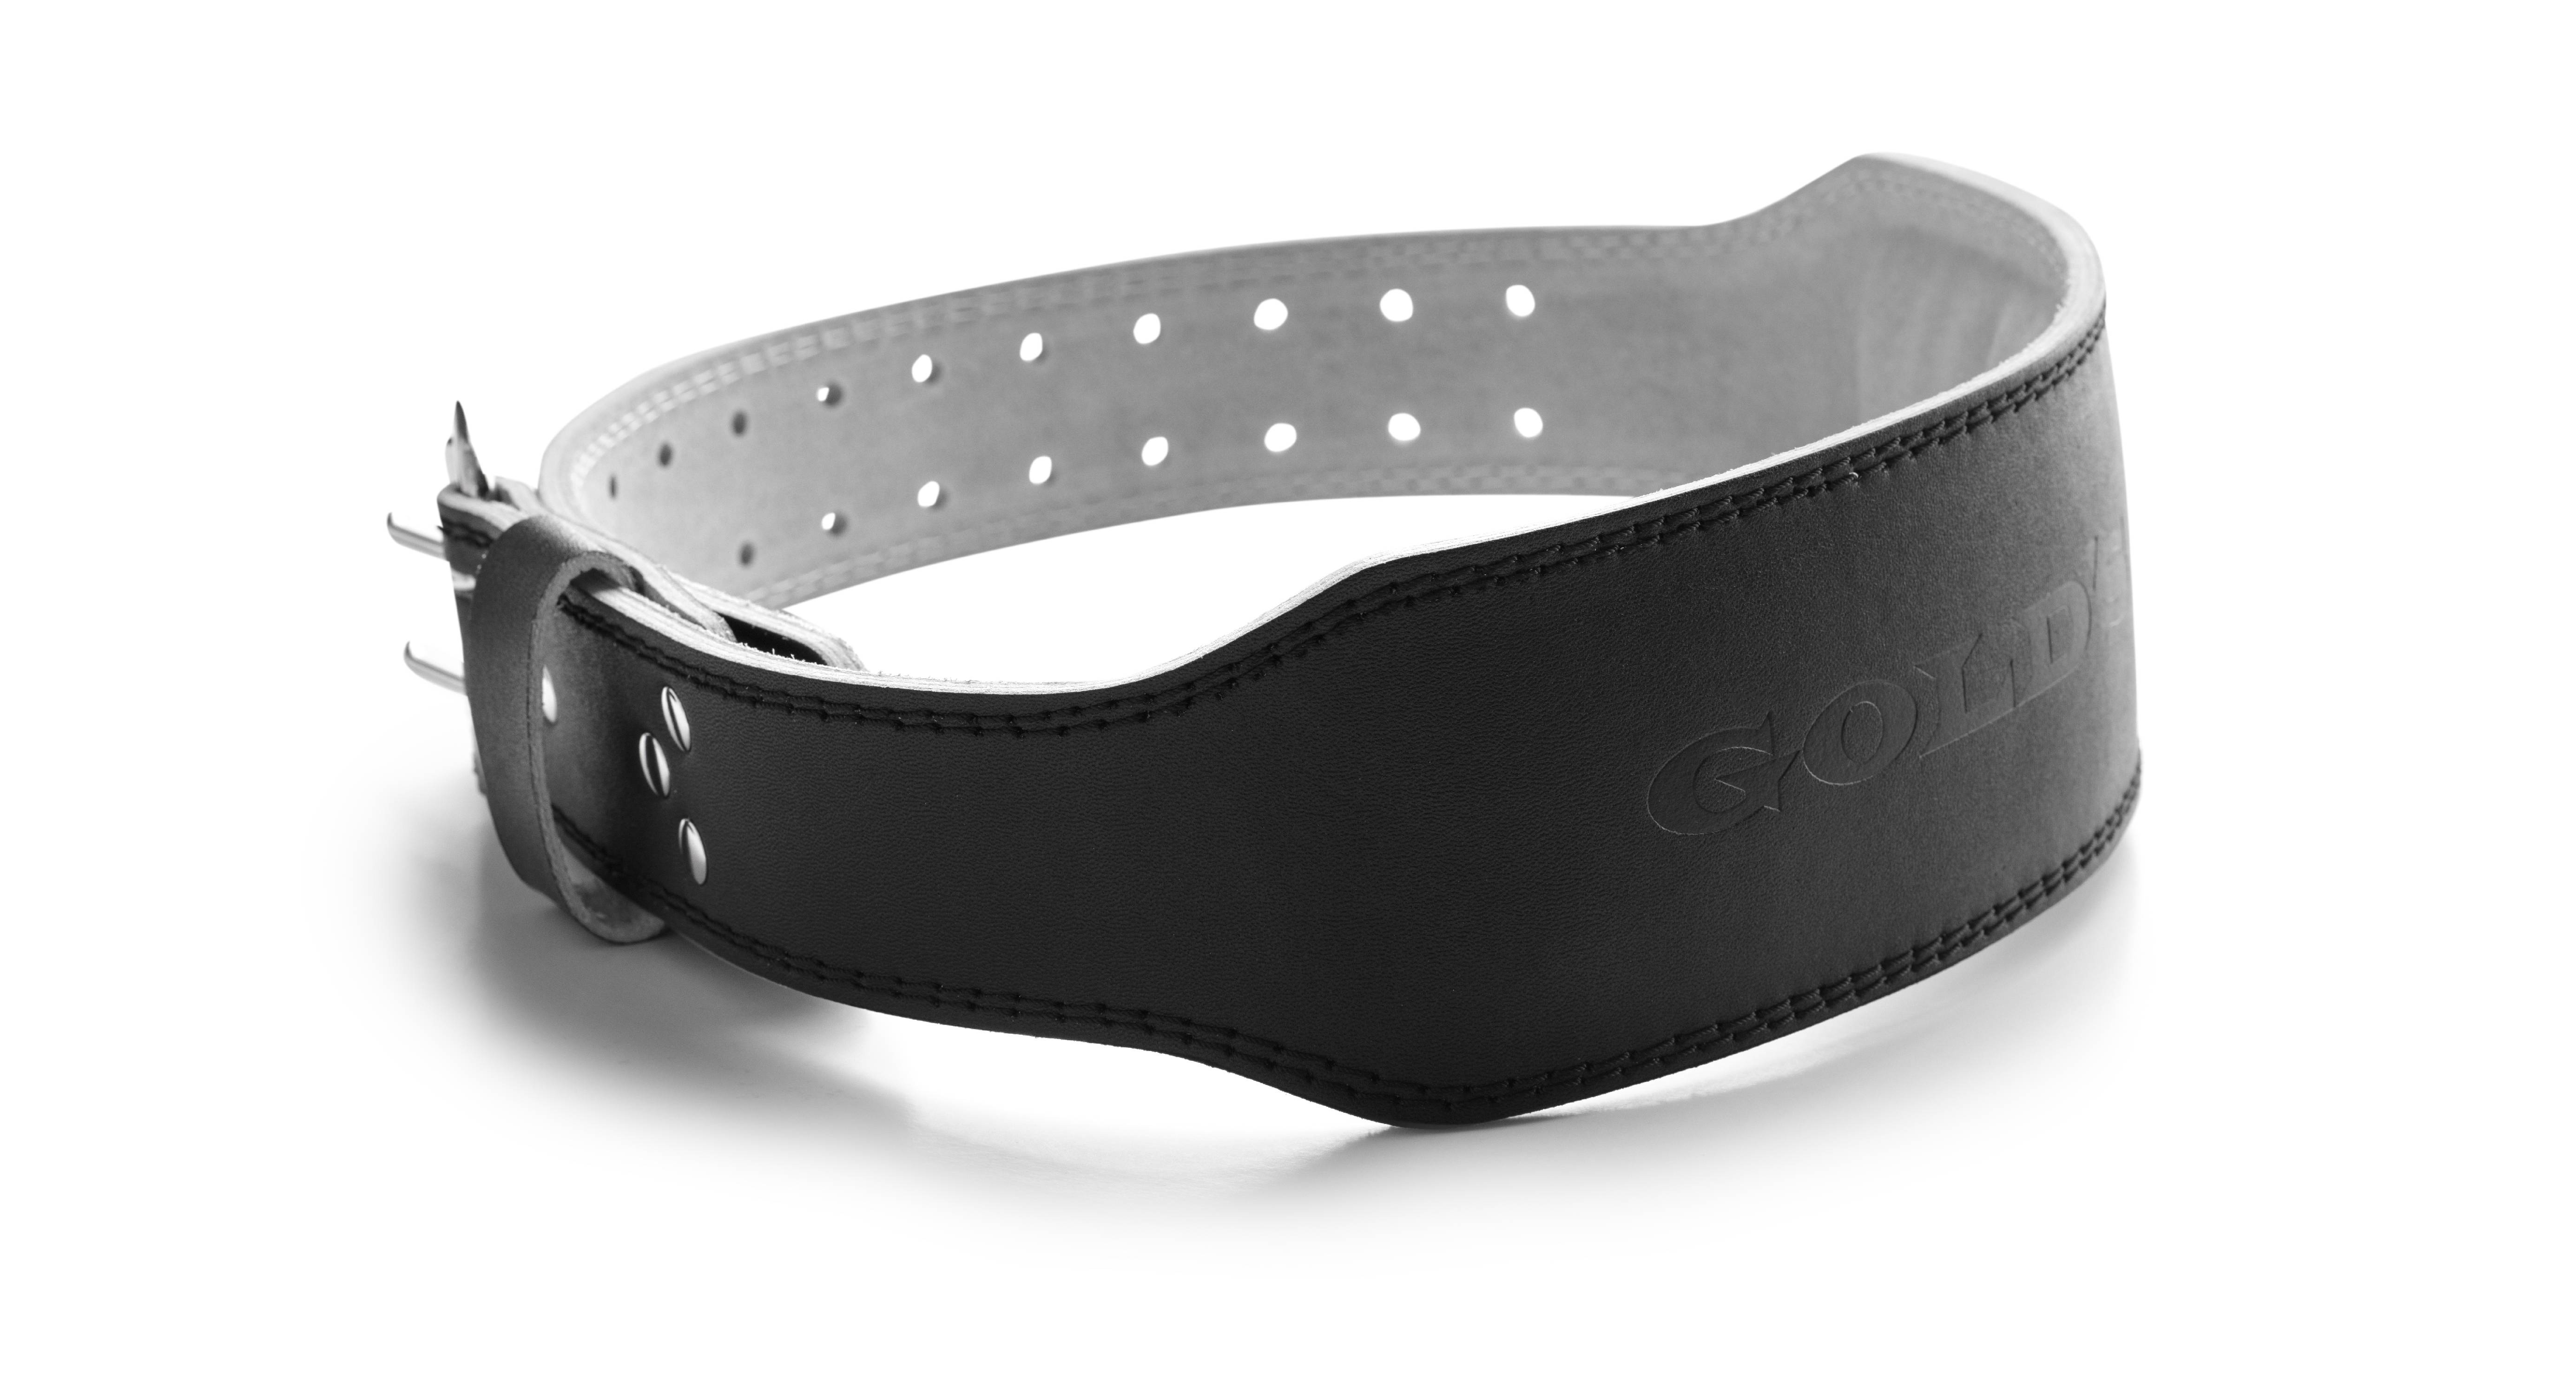 Gold's Gym Leather Weight Lifting Belt with Padded Back Support - image 1 of 5